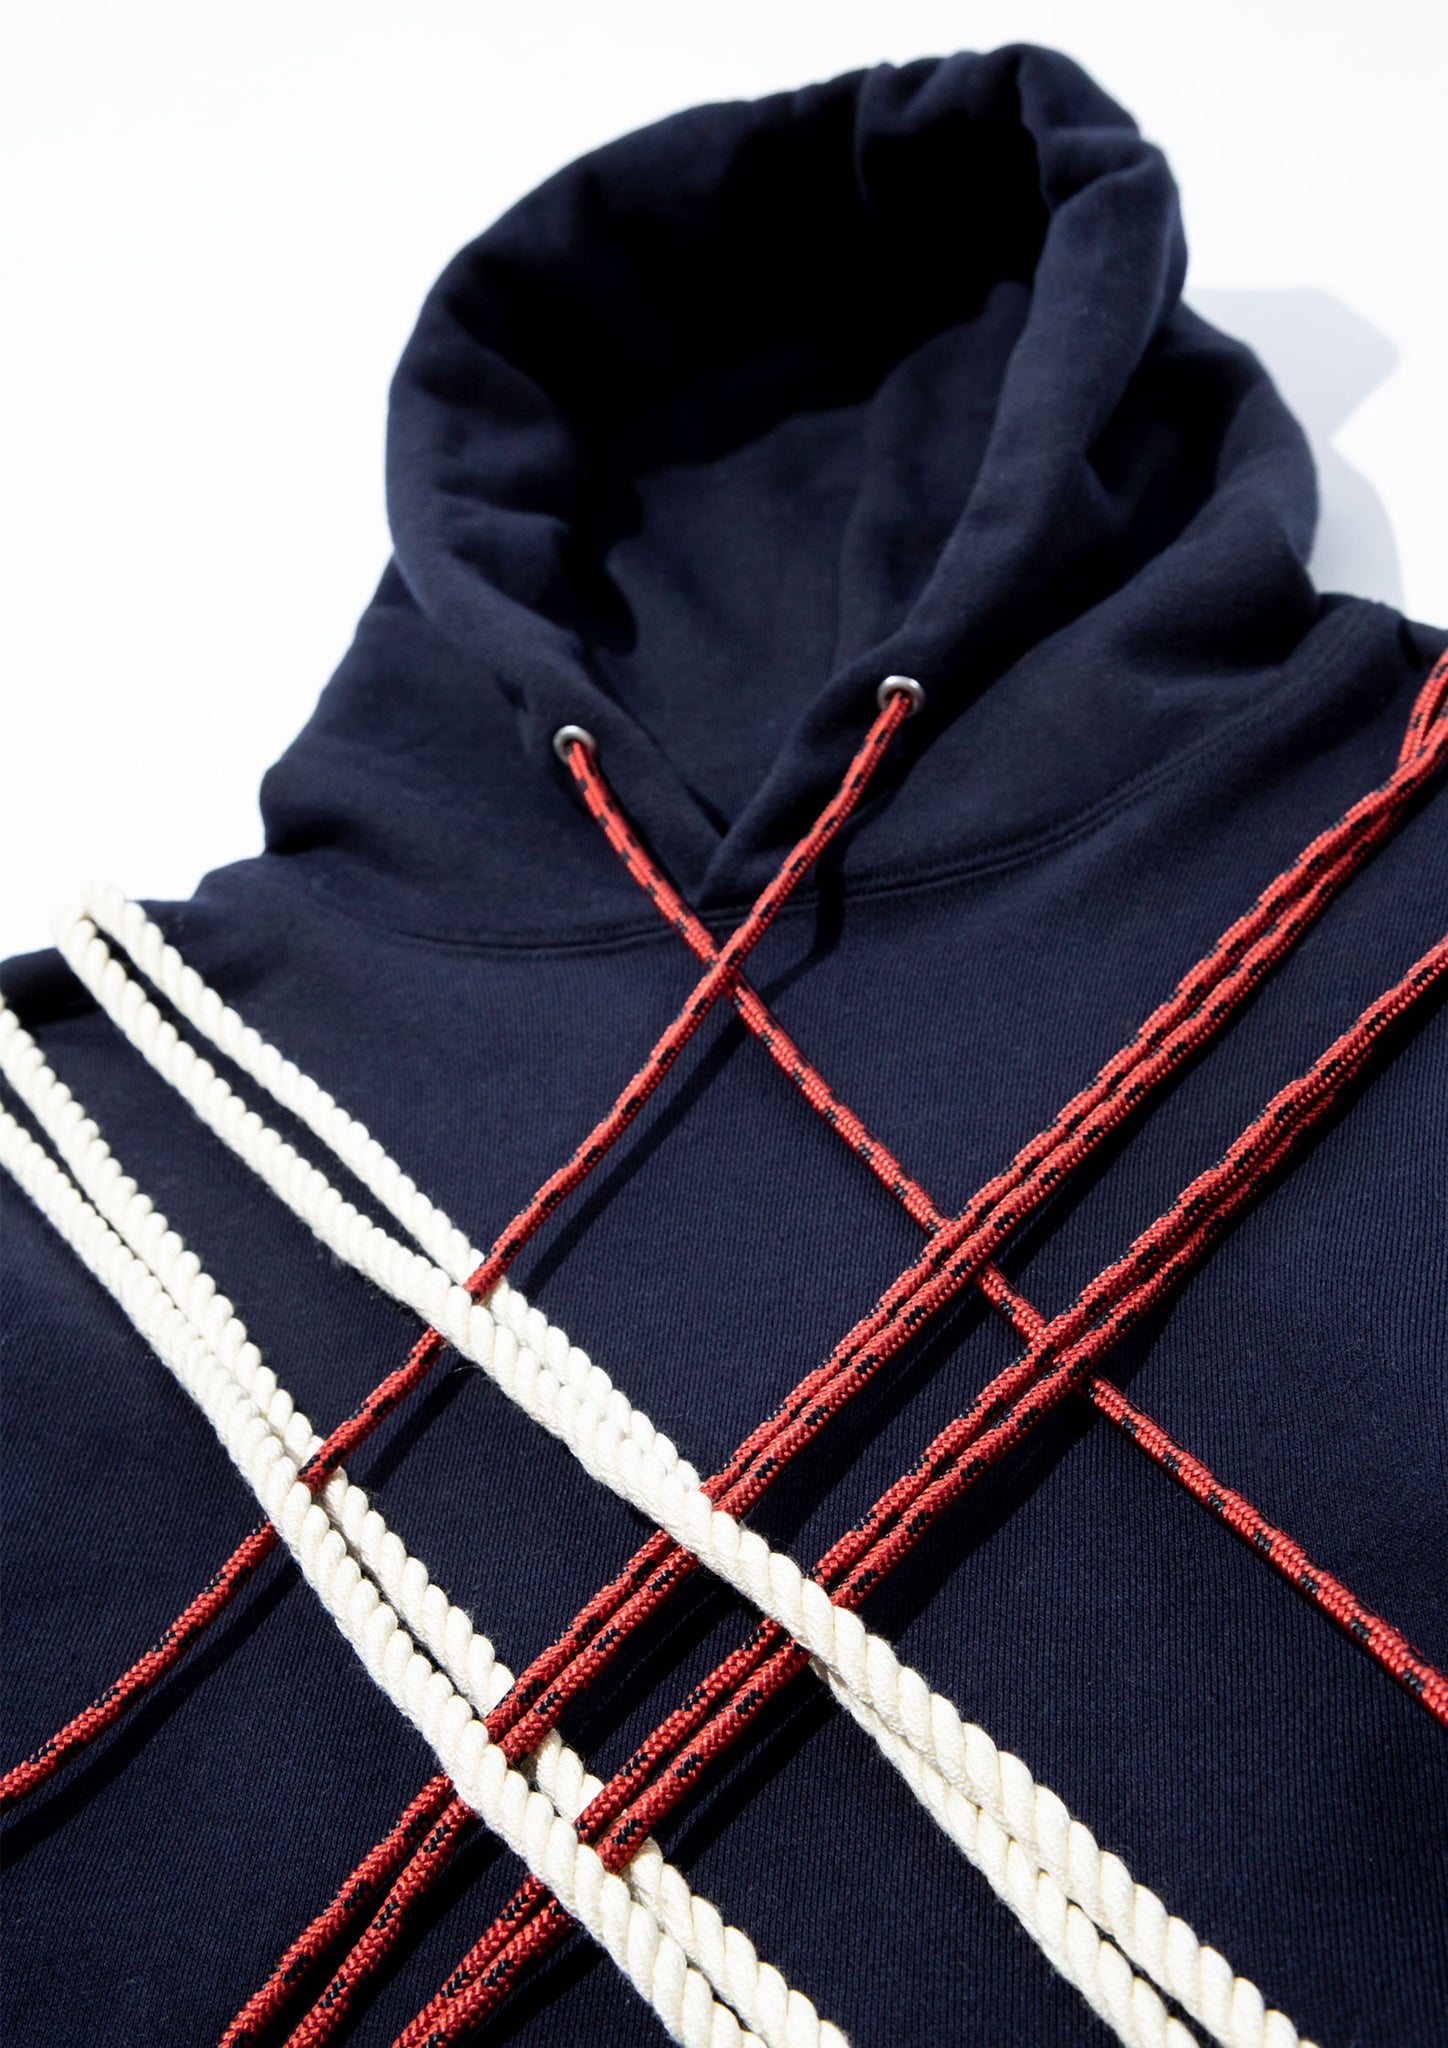 CLOT LACE HOODIE NAVY FALL/WINTER 2020 "CORPORATE CLIMBING"